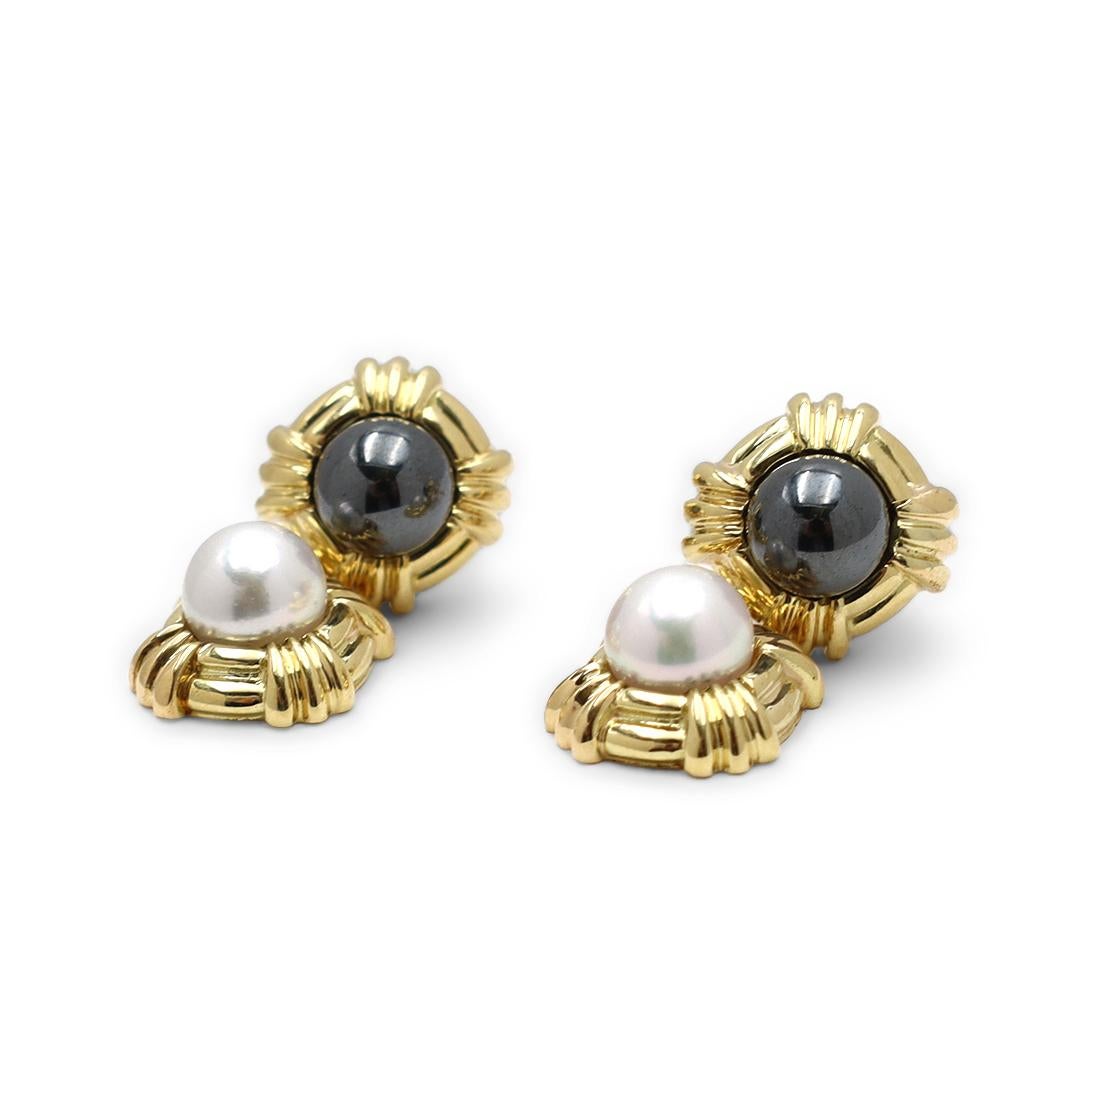 Authentic Tiffany & Co. earrings crafted in 18 karat yellow gold. A take on Tiffany & Co.'s iconic 'X' design, each earring features a 6.3mm pearl surrounded by a geometric gold frame, suspended from another frame centering on a hematite bead. The